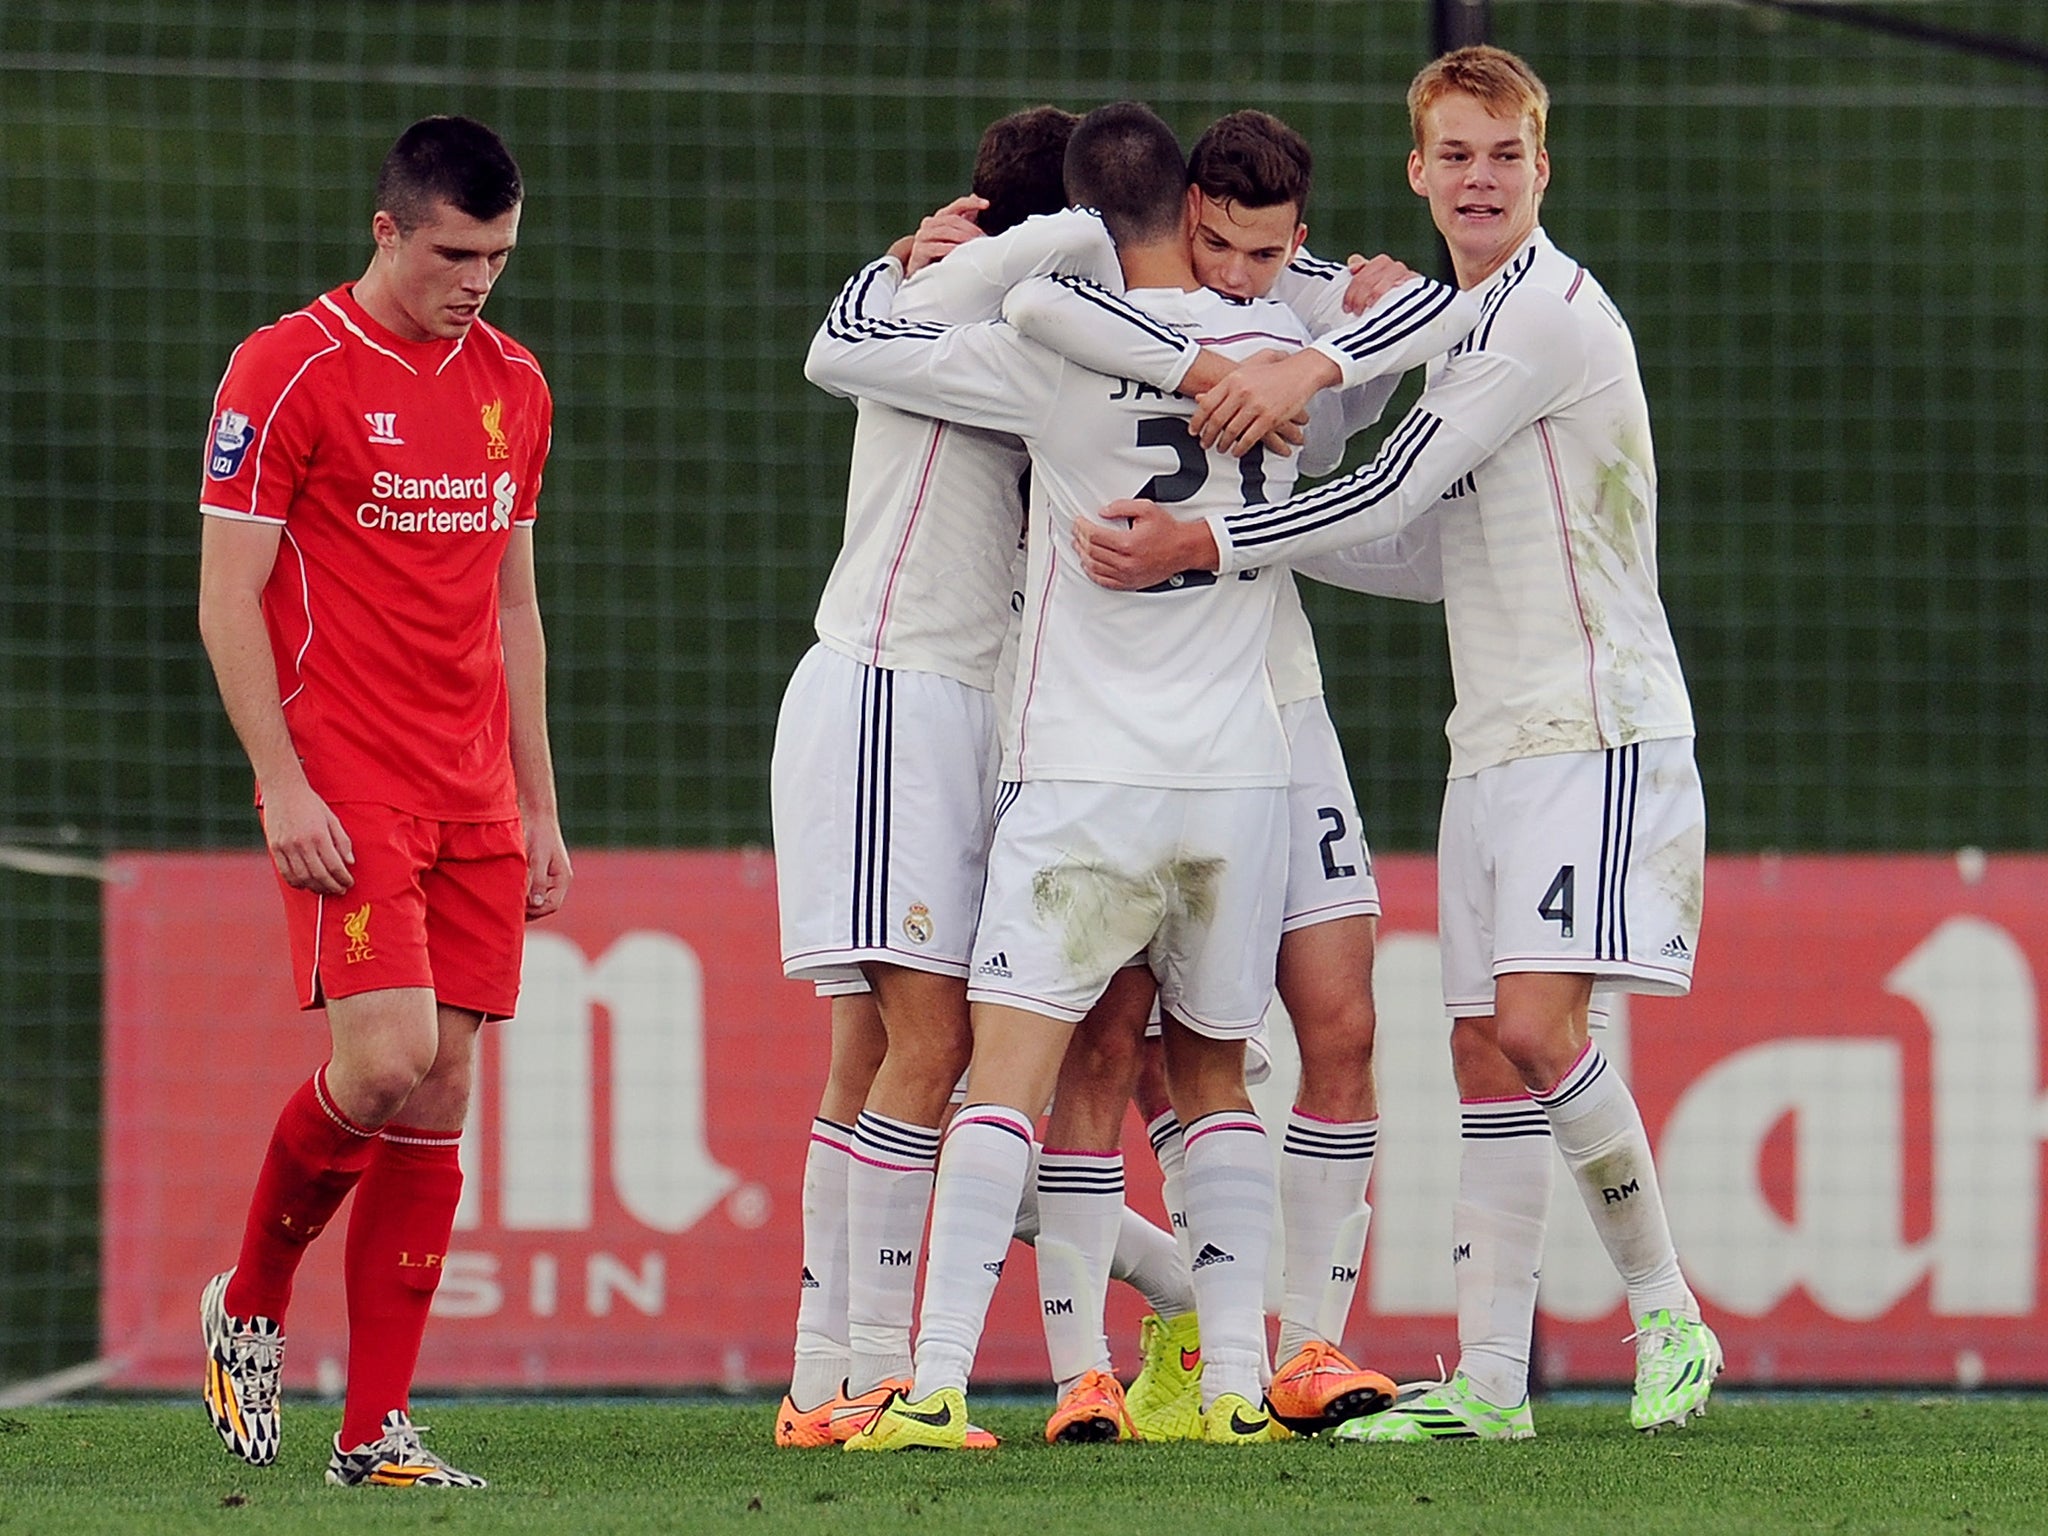 Jack Harper of Real Madrid celebrates after scoring during the Uefa Youth League match between Real Madrid and Liverpool